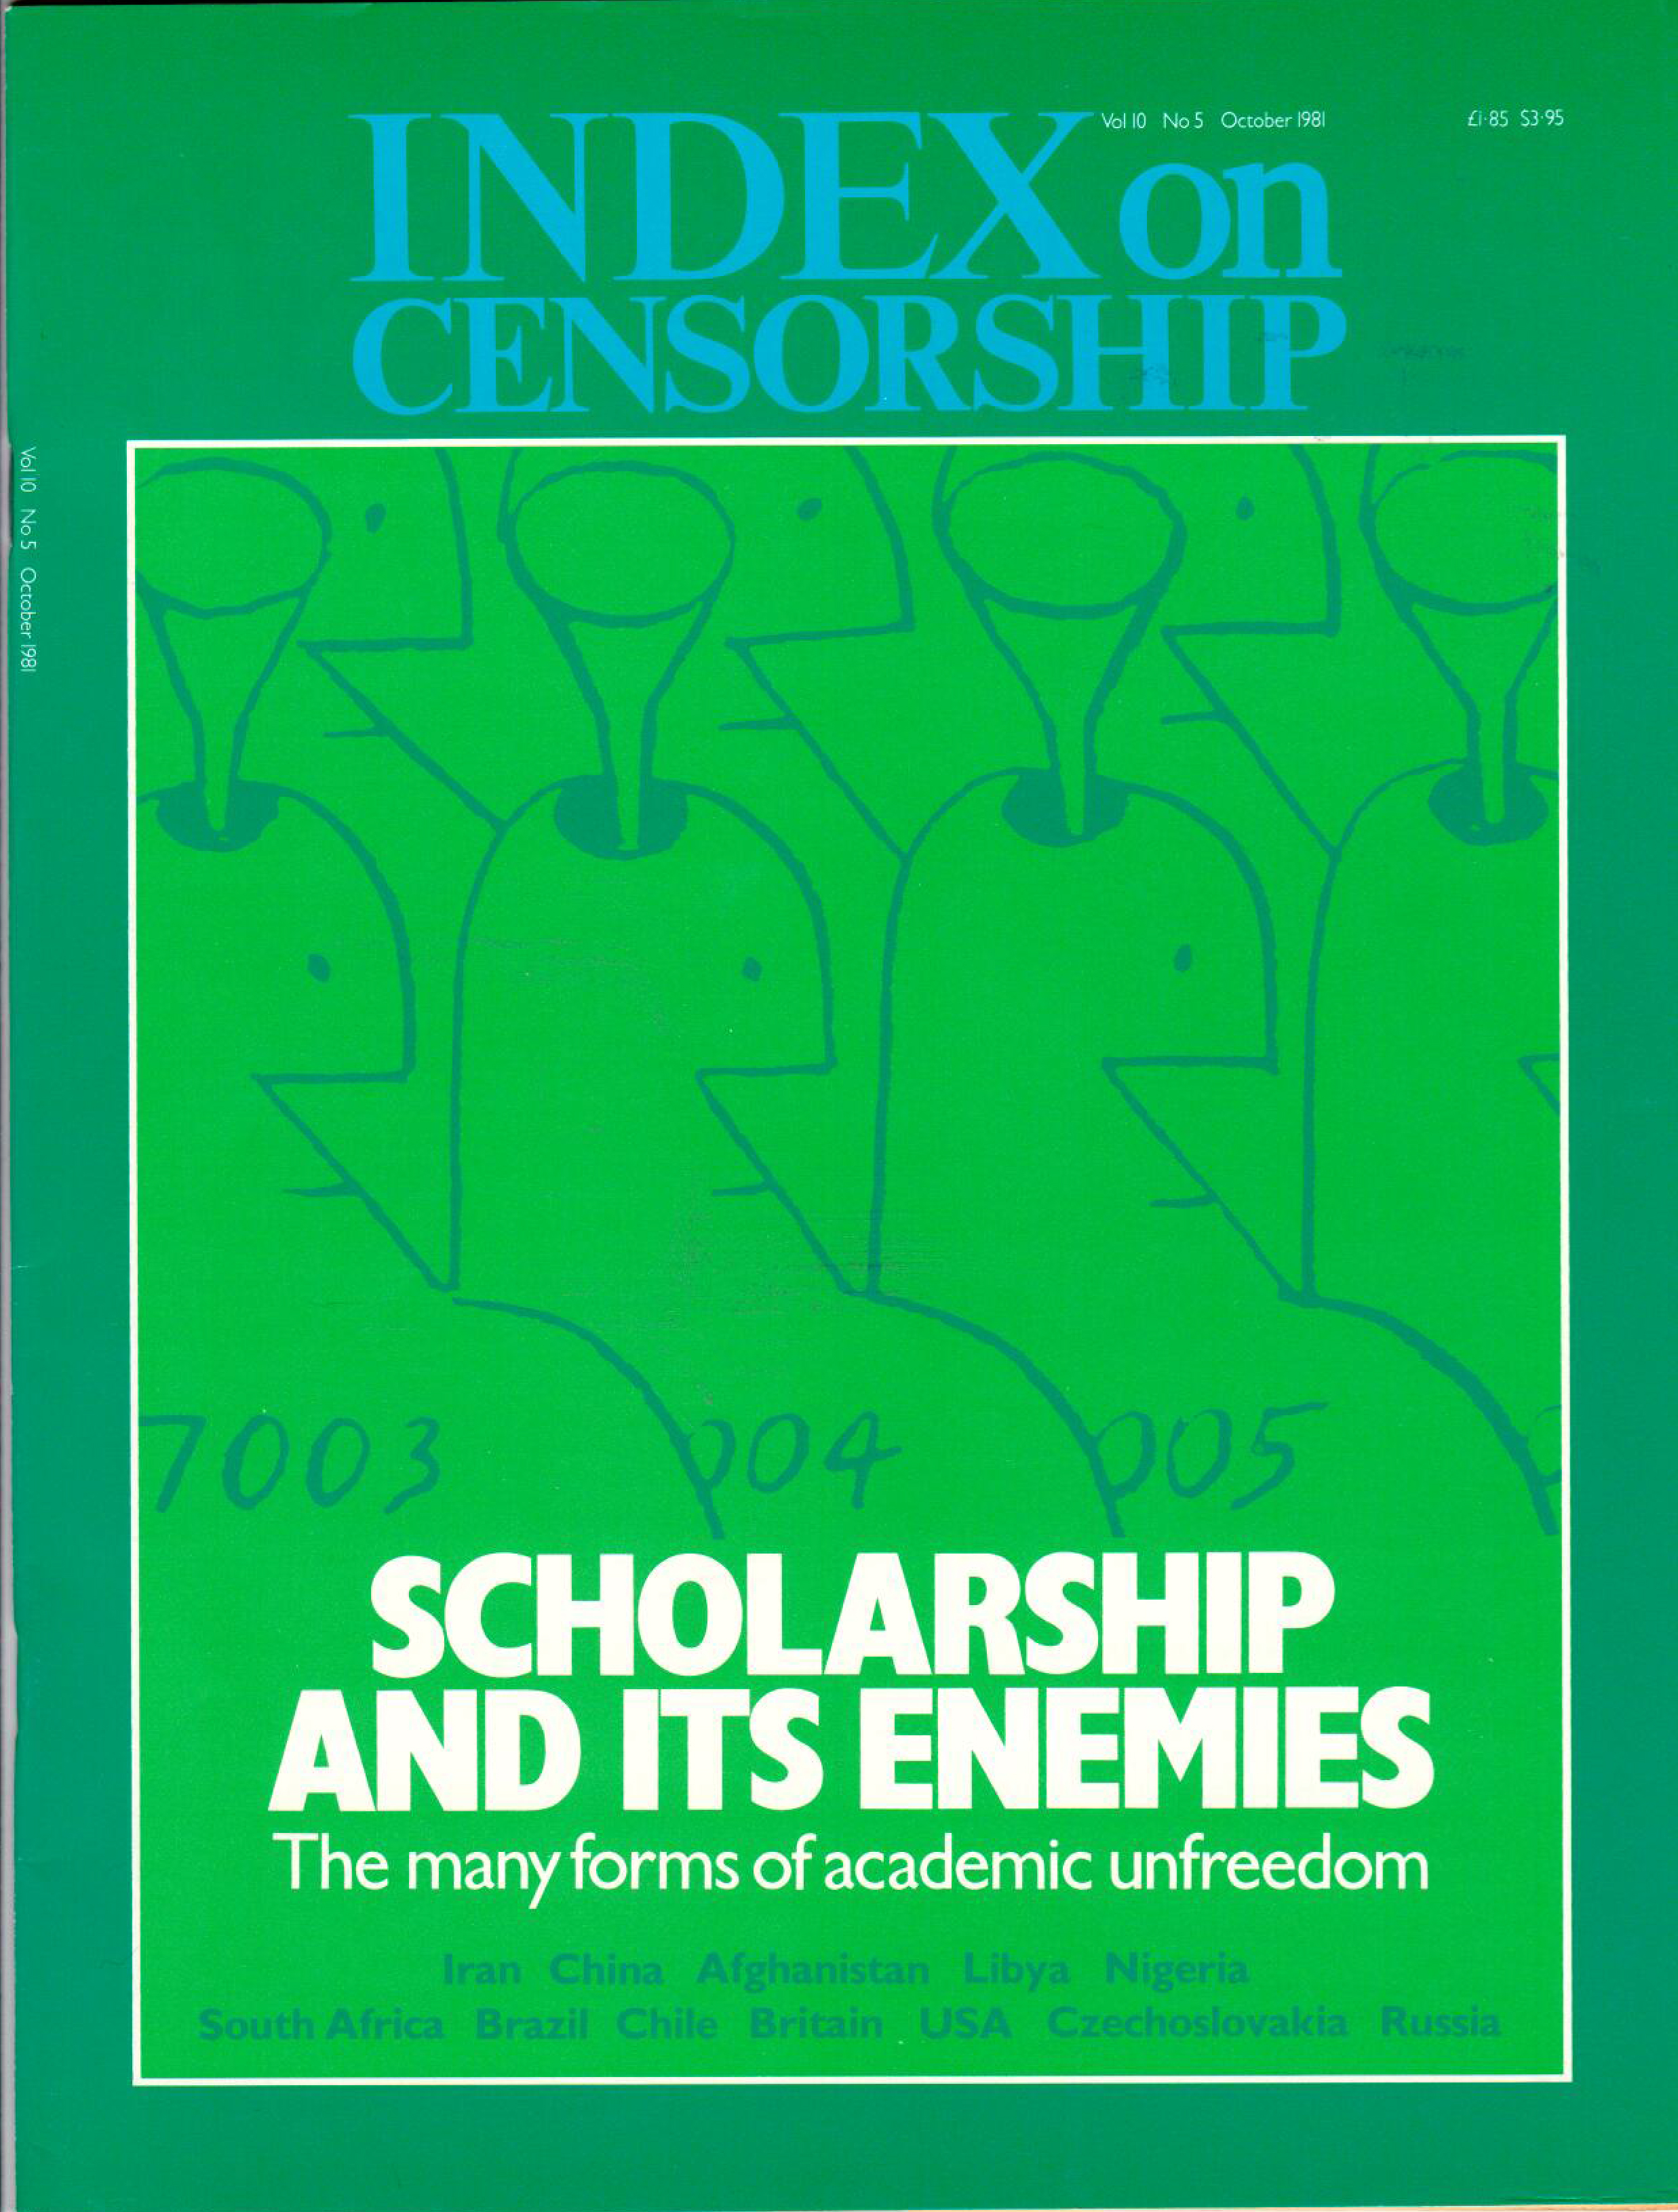 Scholarship and its enemies, the October 1981 issue of Index on Censorship magazine